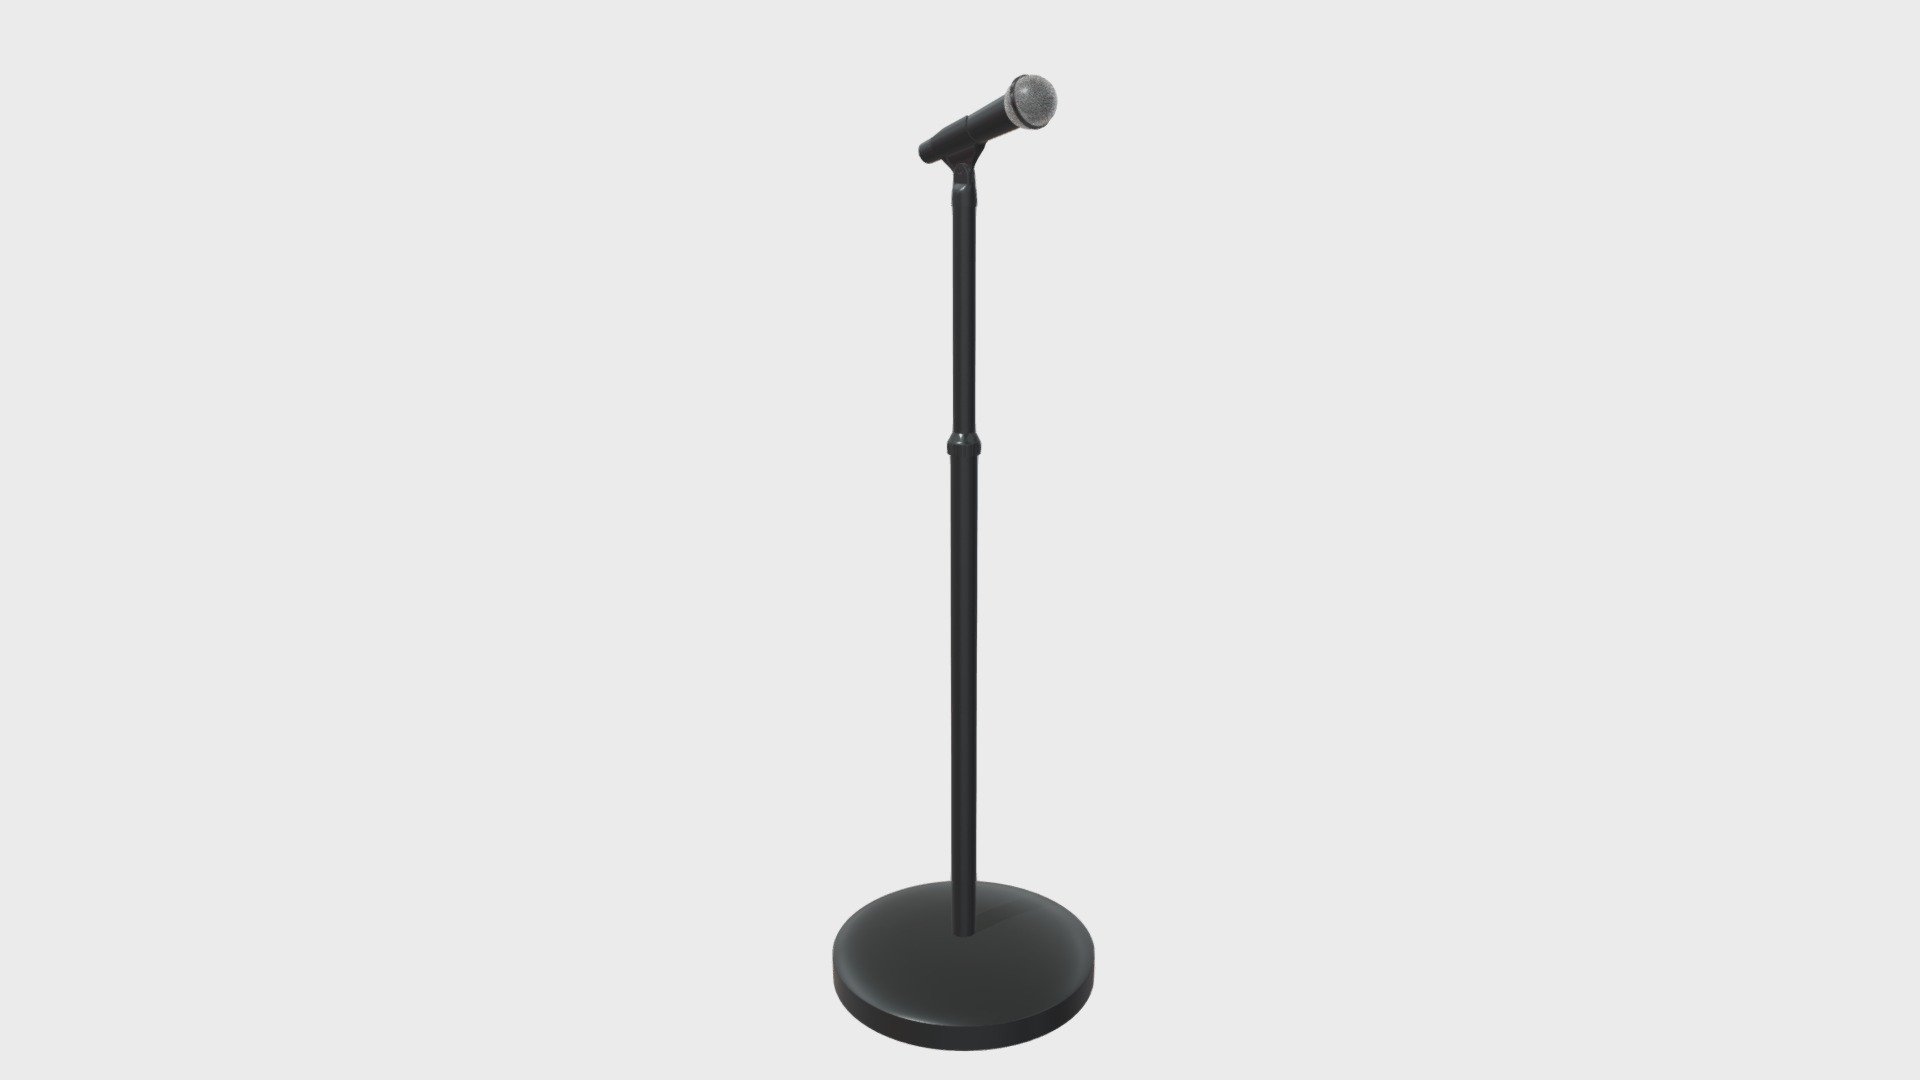 === The following description refers to the additional ZIP package provided with this model ===

Microphone on stand with round base 3D Model. 4 individual objects (microphone, rotating part, extension, base; so, you can move the extension, rotate the microphone or easily delete it), sharing the same non overlapping UV Layout map, Material and PBR Textures set. Production-ready 3D Model, with PBR materials, textures, non overlapping UV Layout map provided in the package.

Quads only geometries (no tris/ngons).

Formats included: FBX, OBJ; scenes: BLEND (with Cycles / Eevee PBR Materials and Textures); other: png with Alpha.

4 Objects (meshes), 1 PBR Material, UV unwrapped (non overlapping UV Layout map provided in the package); UV-mapped Textures.

UV Layout maps and Image Textures resolutions: 2048x2048; PBR Textures made with Substance Painter.

Polygonal, QUADS ONLY (no tris/ngons); 196444 vertices, 194214 quad faces (388428 tris) 3d model